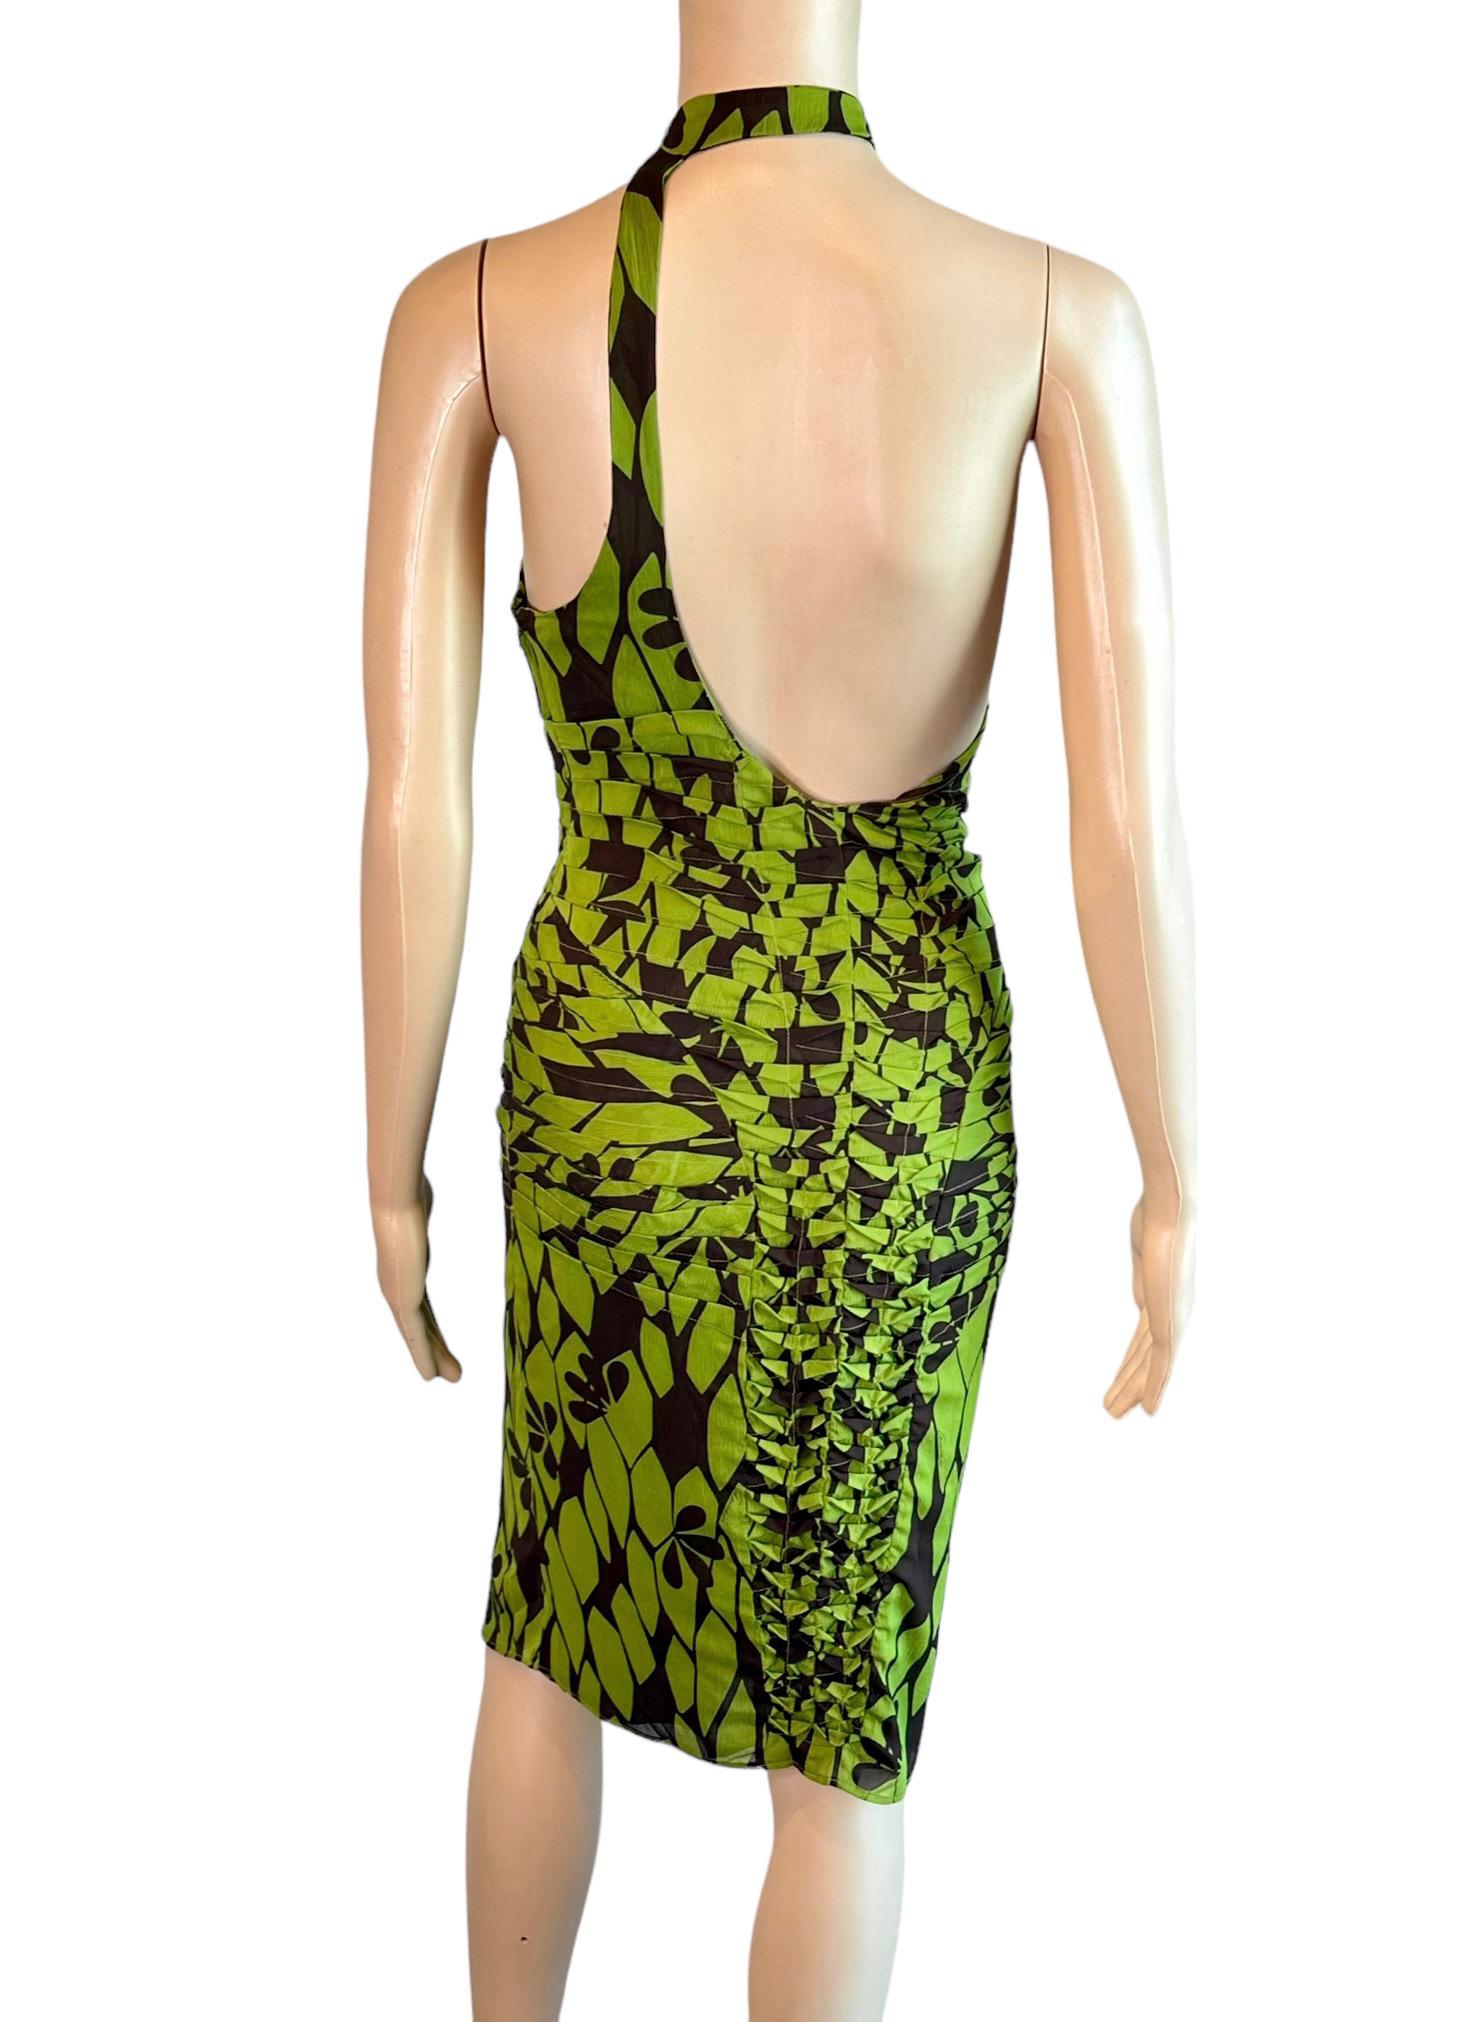 Tom Ford for Gucci F/W 2003 Cutout Back Asymmetric Bodycon Dress  In Good Condition For Sale In Naples, FL